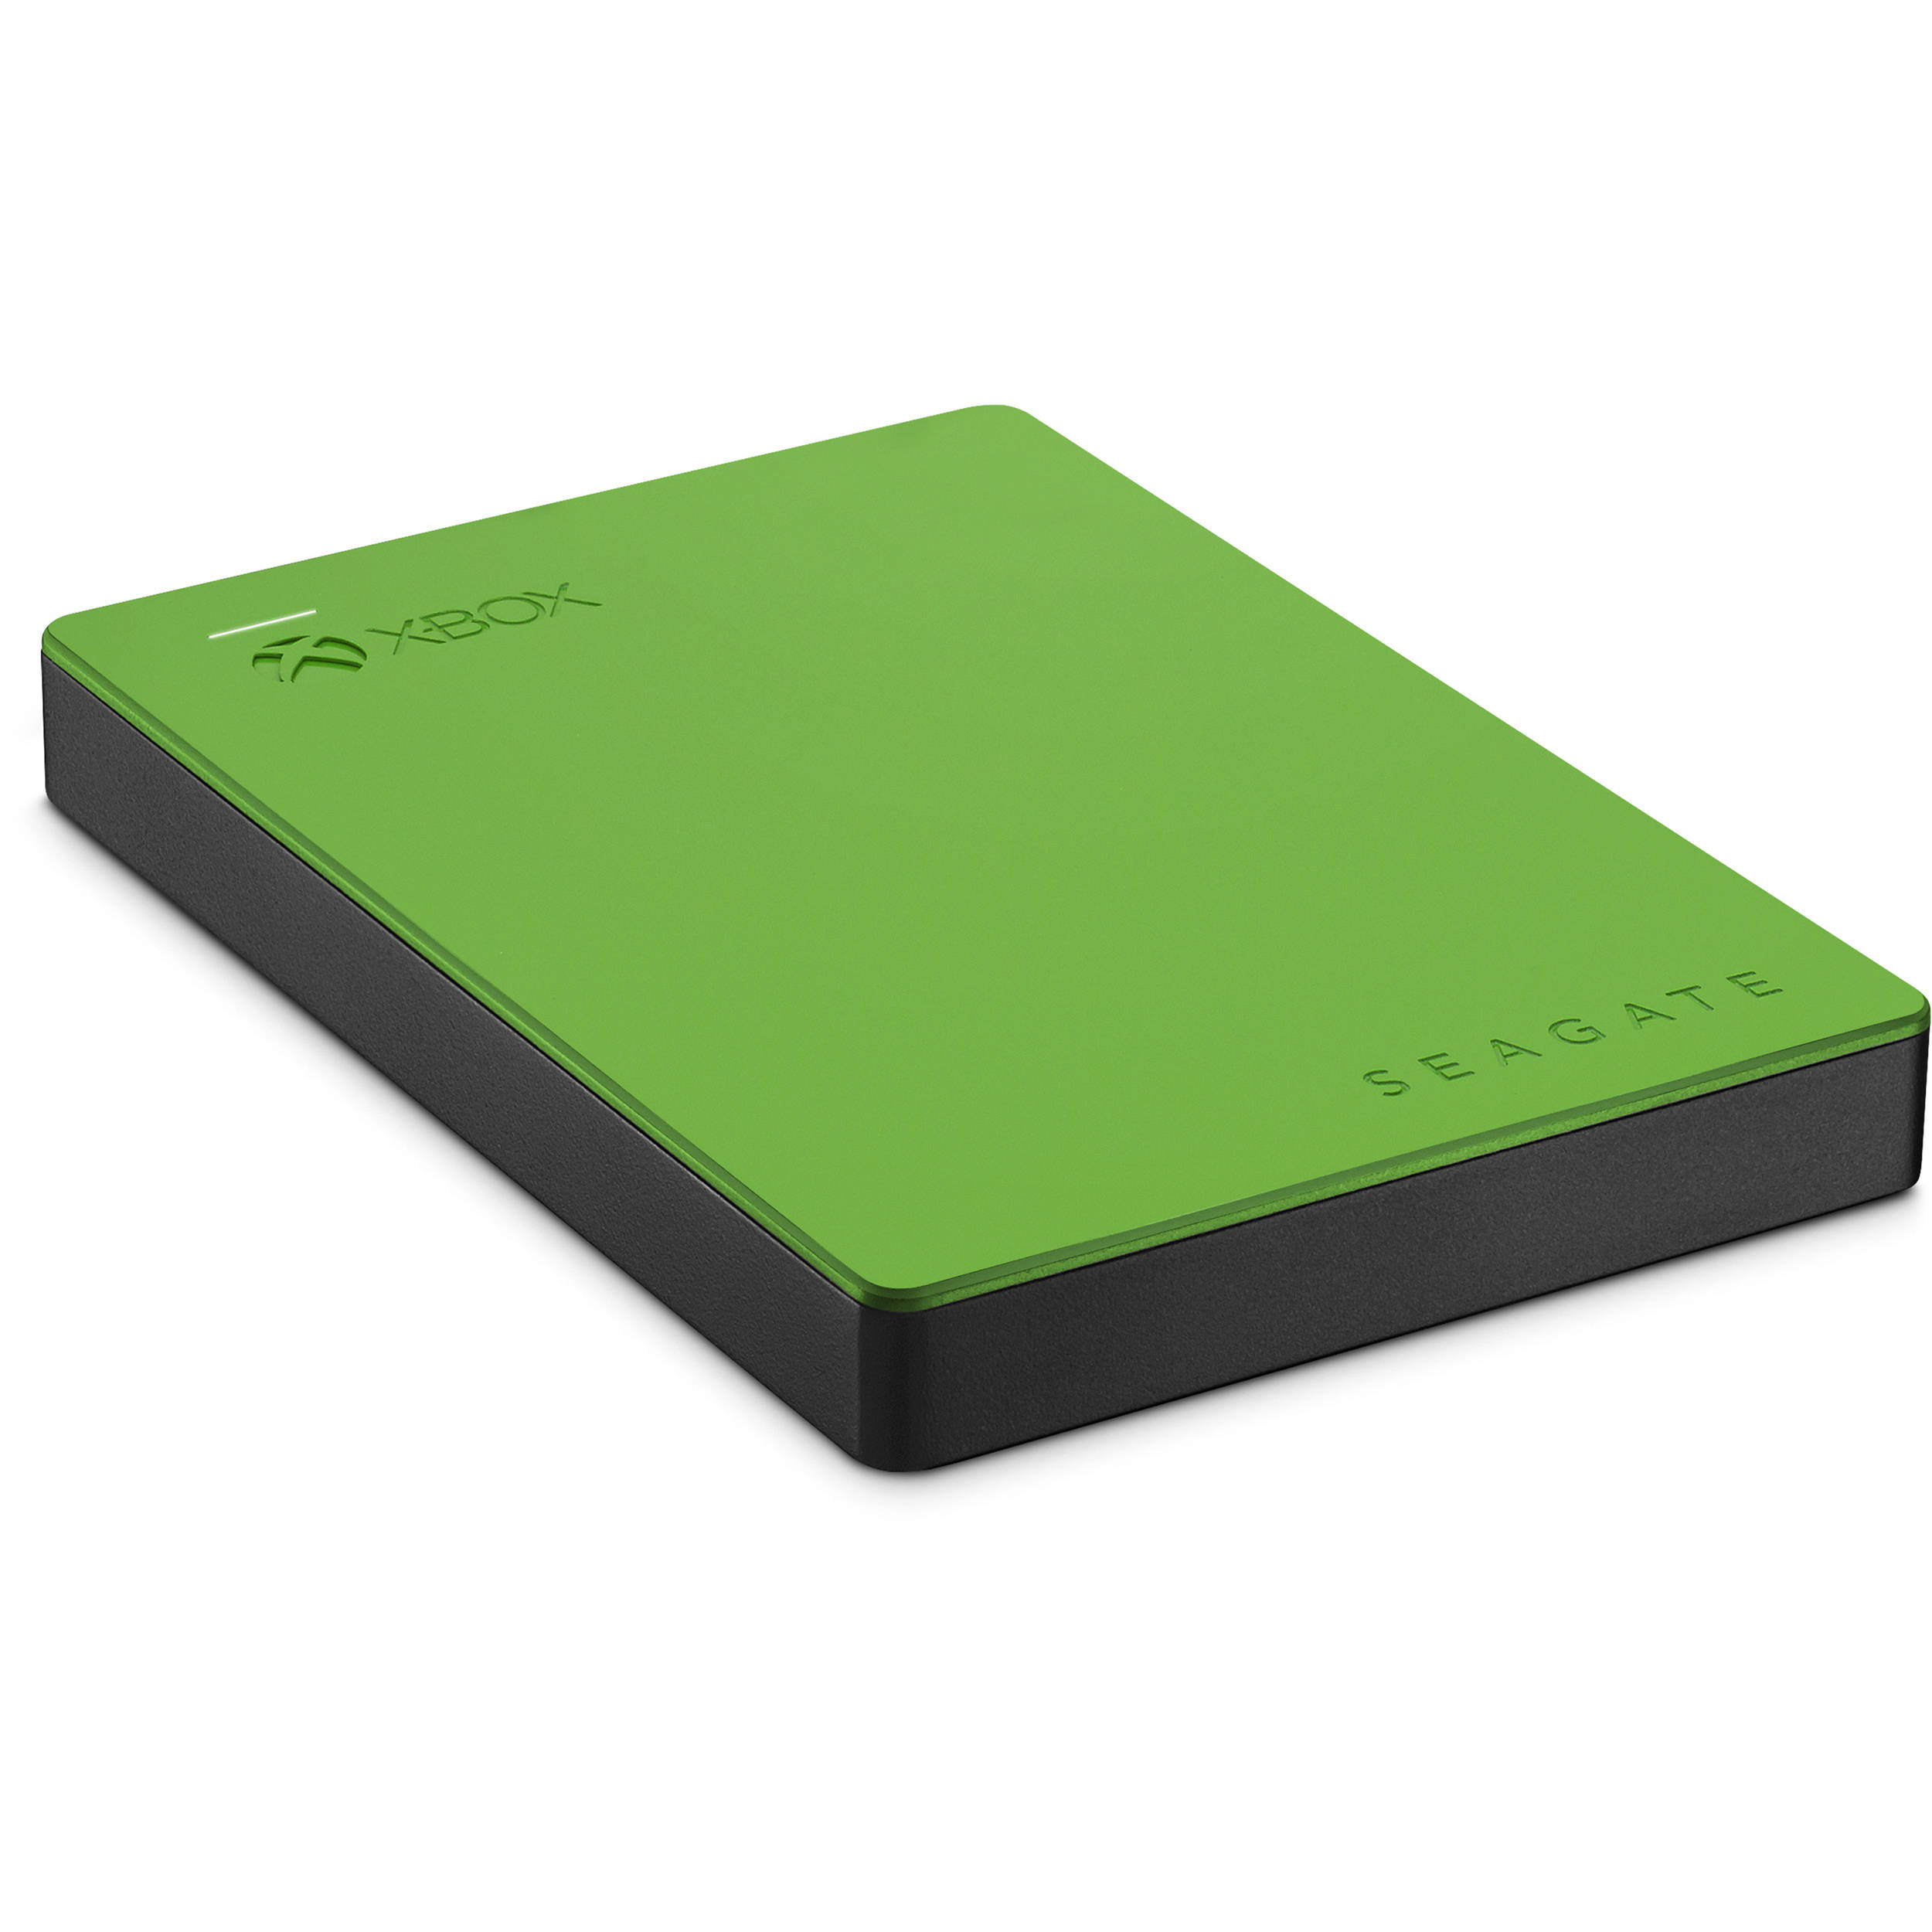 2 terabyte hard drive for xbox one